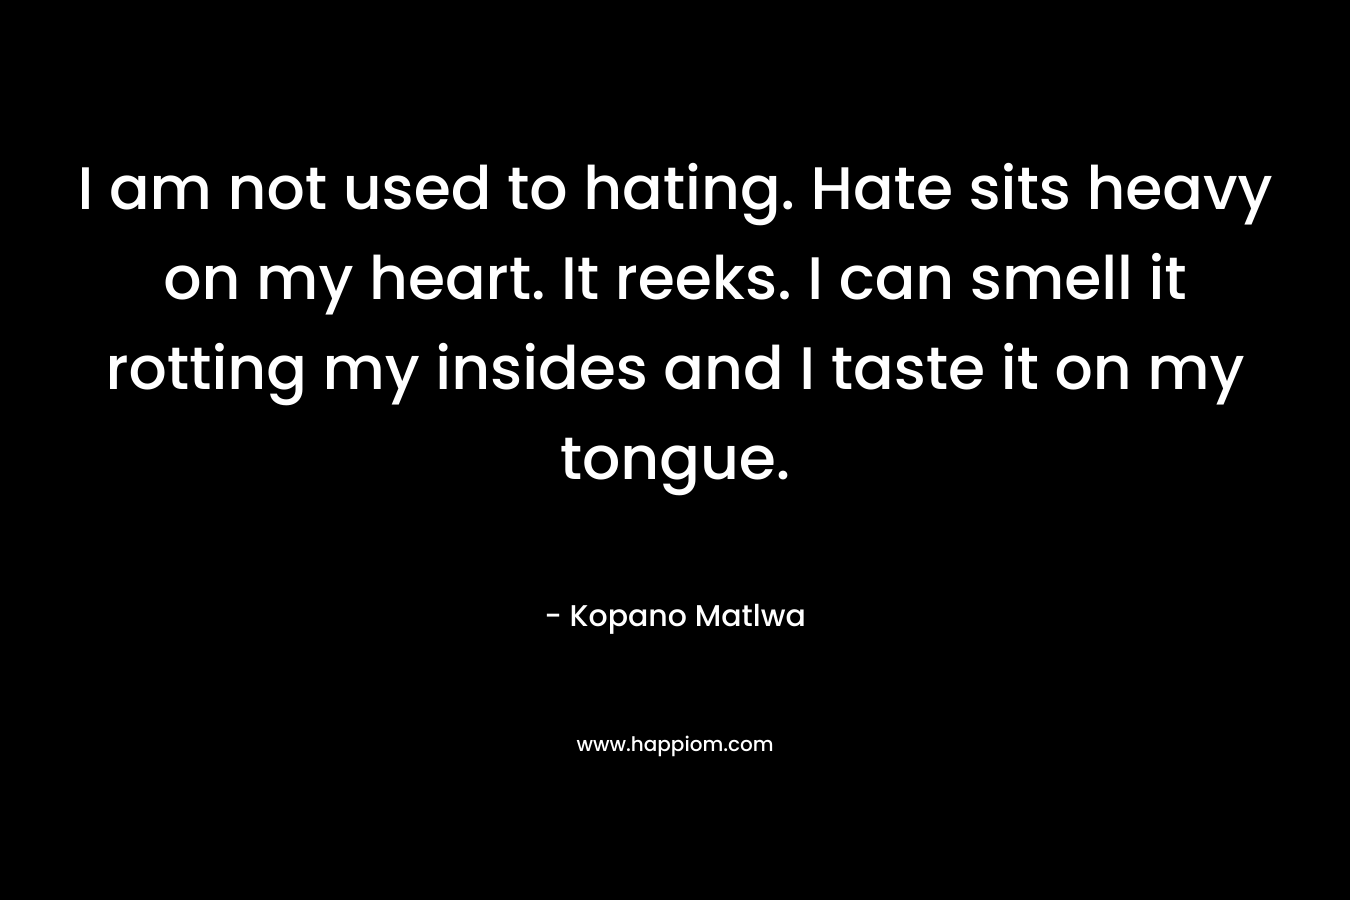 I am not used to hating. Hate sits heavy on my heart. It reeks. I can smell it rotting my insides and I taste it on my tongue.